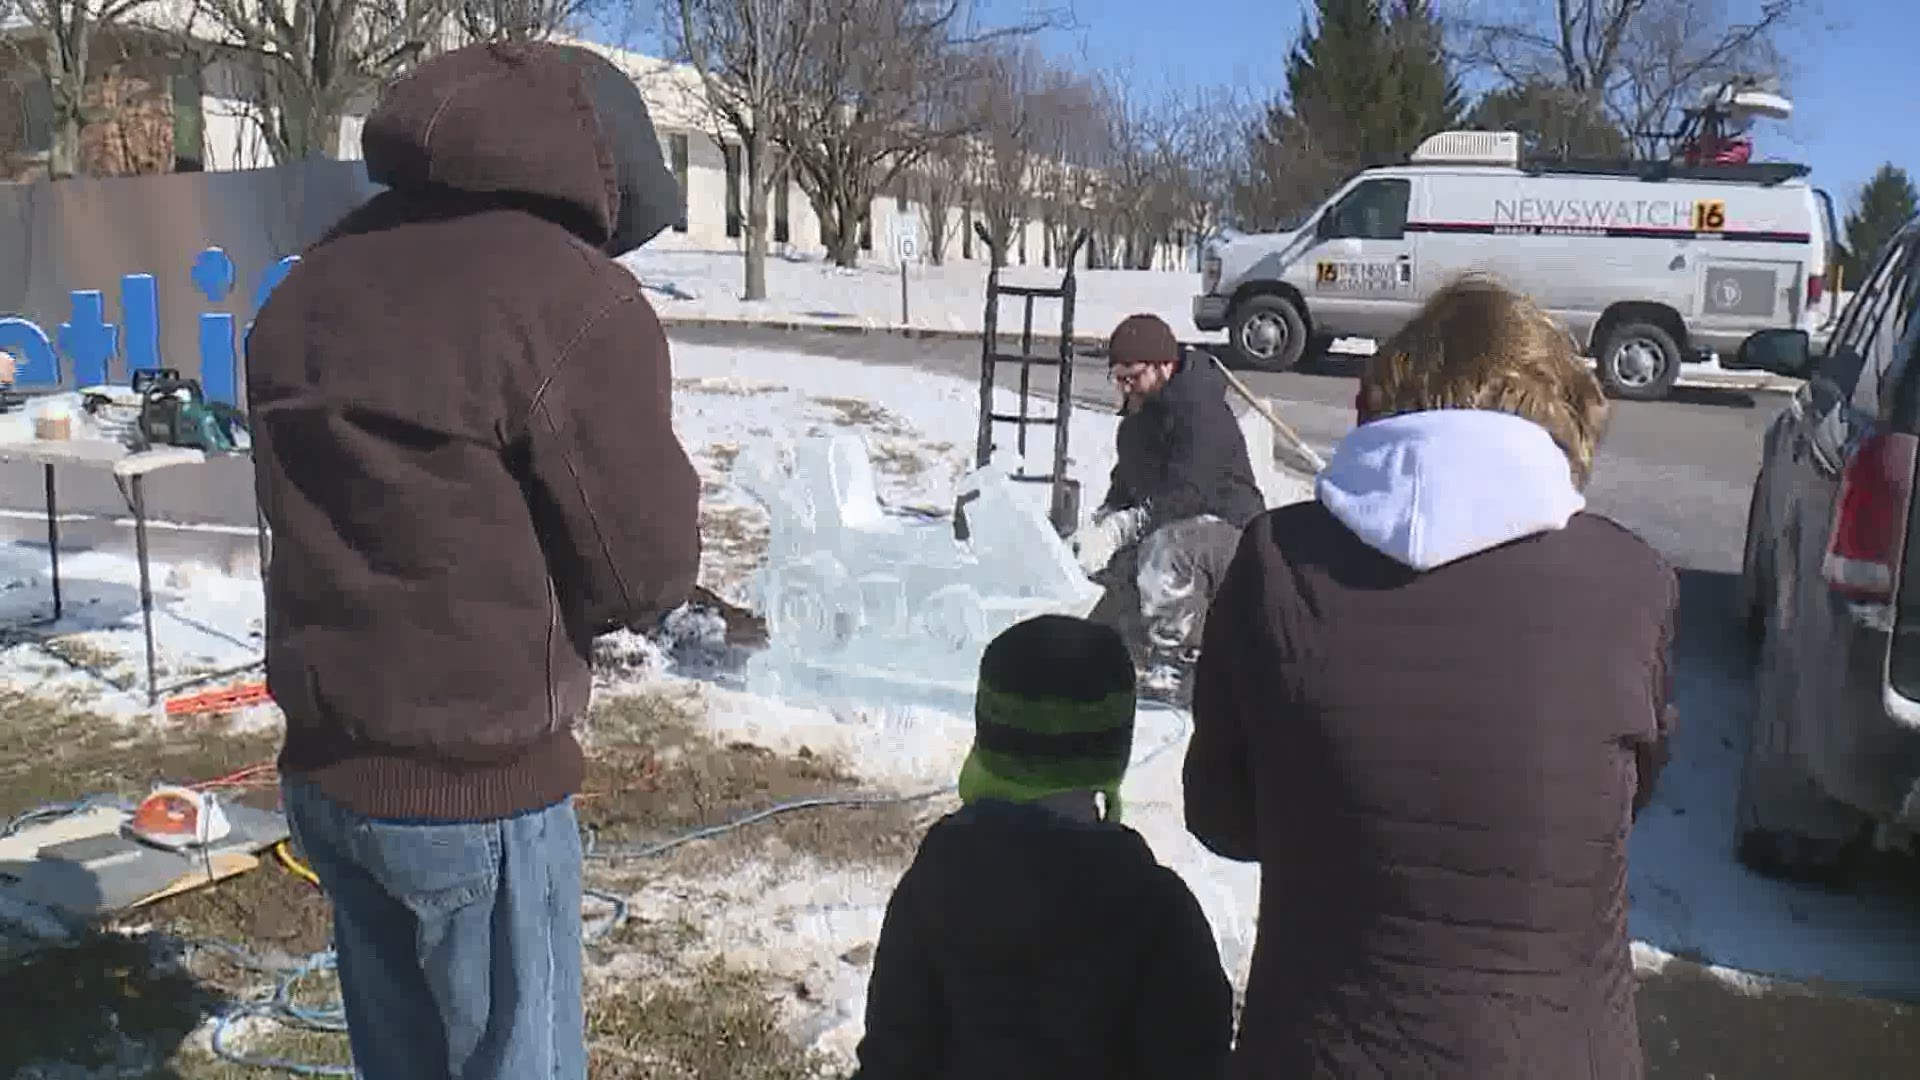 You can see more than 50 ice sculptures throughout the Clarks Summit area this weekend.